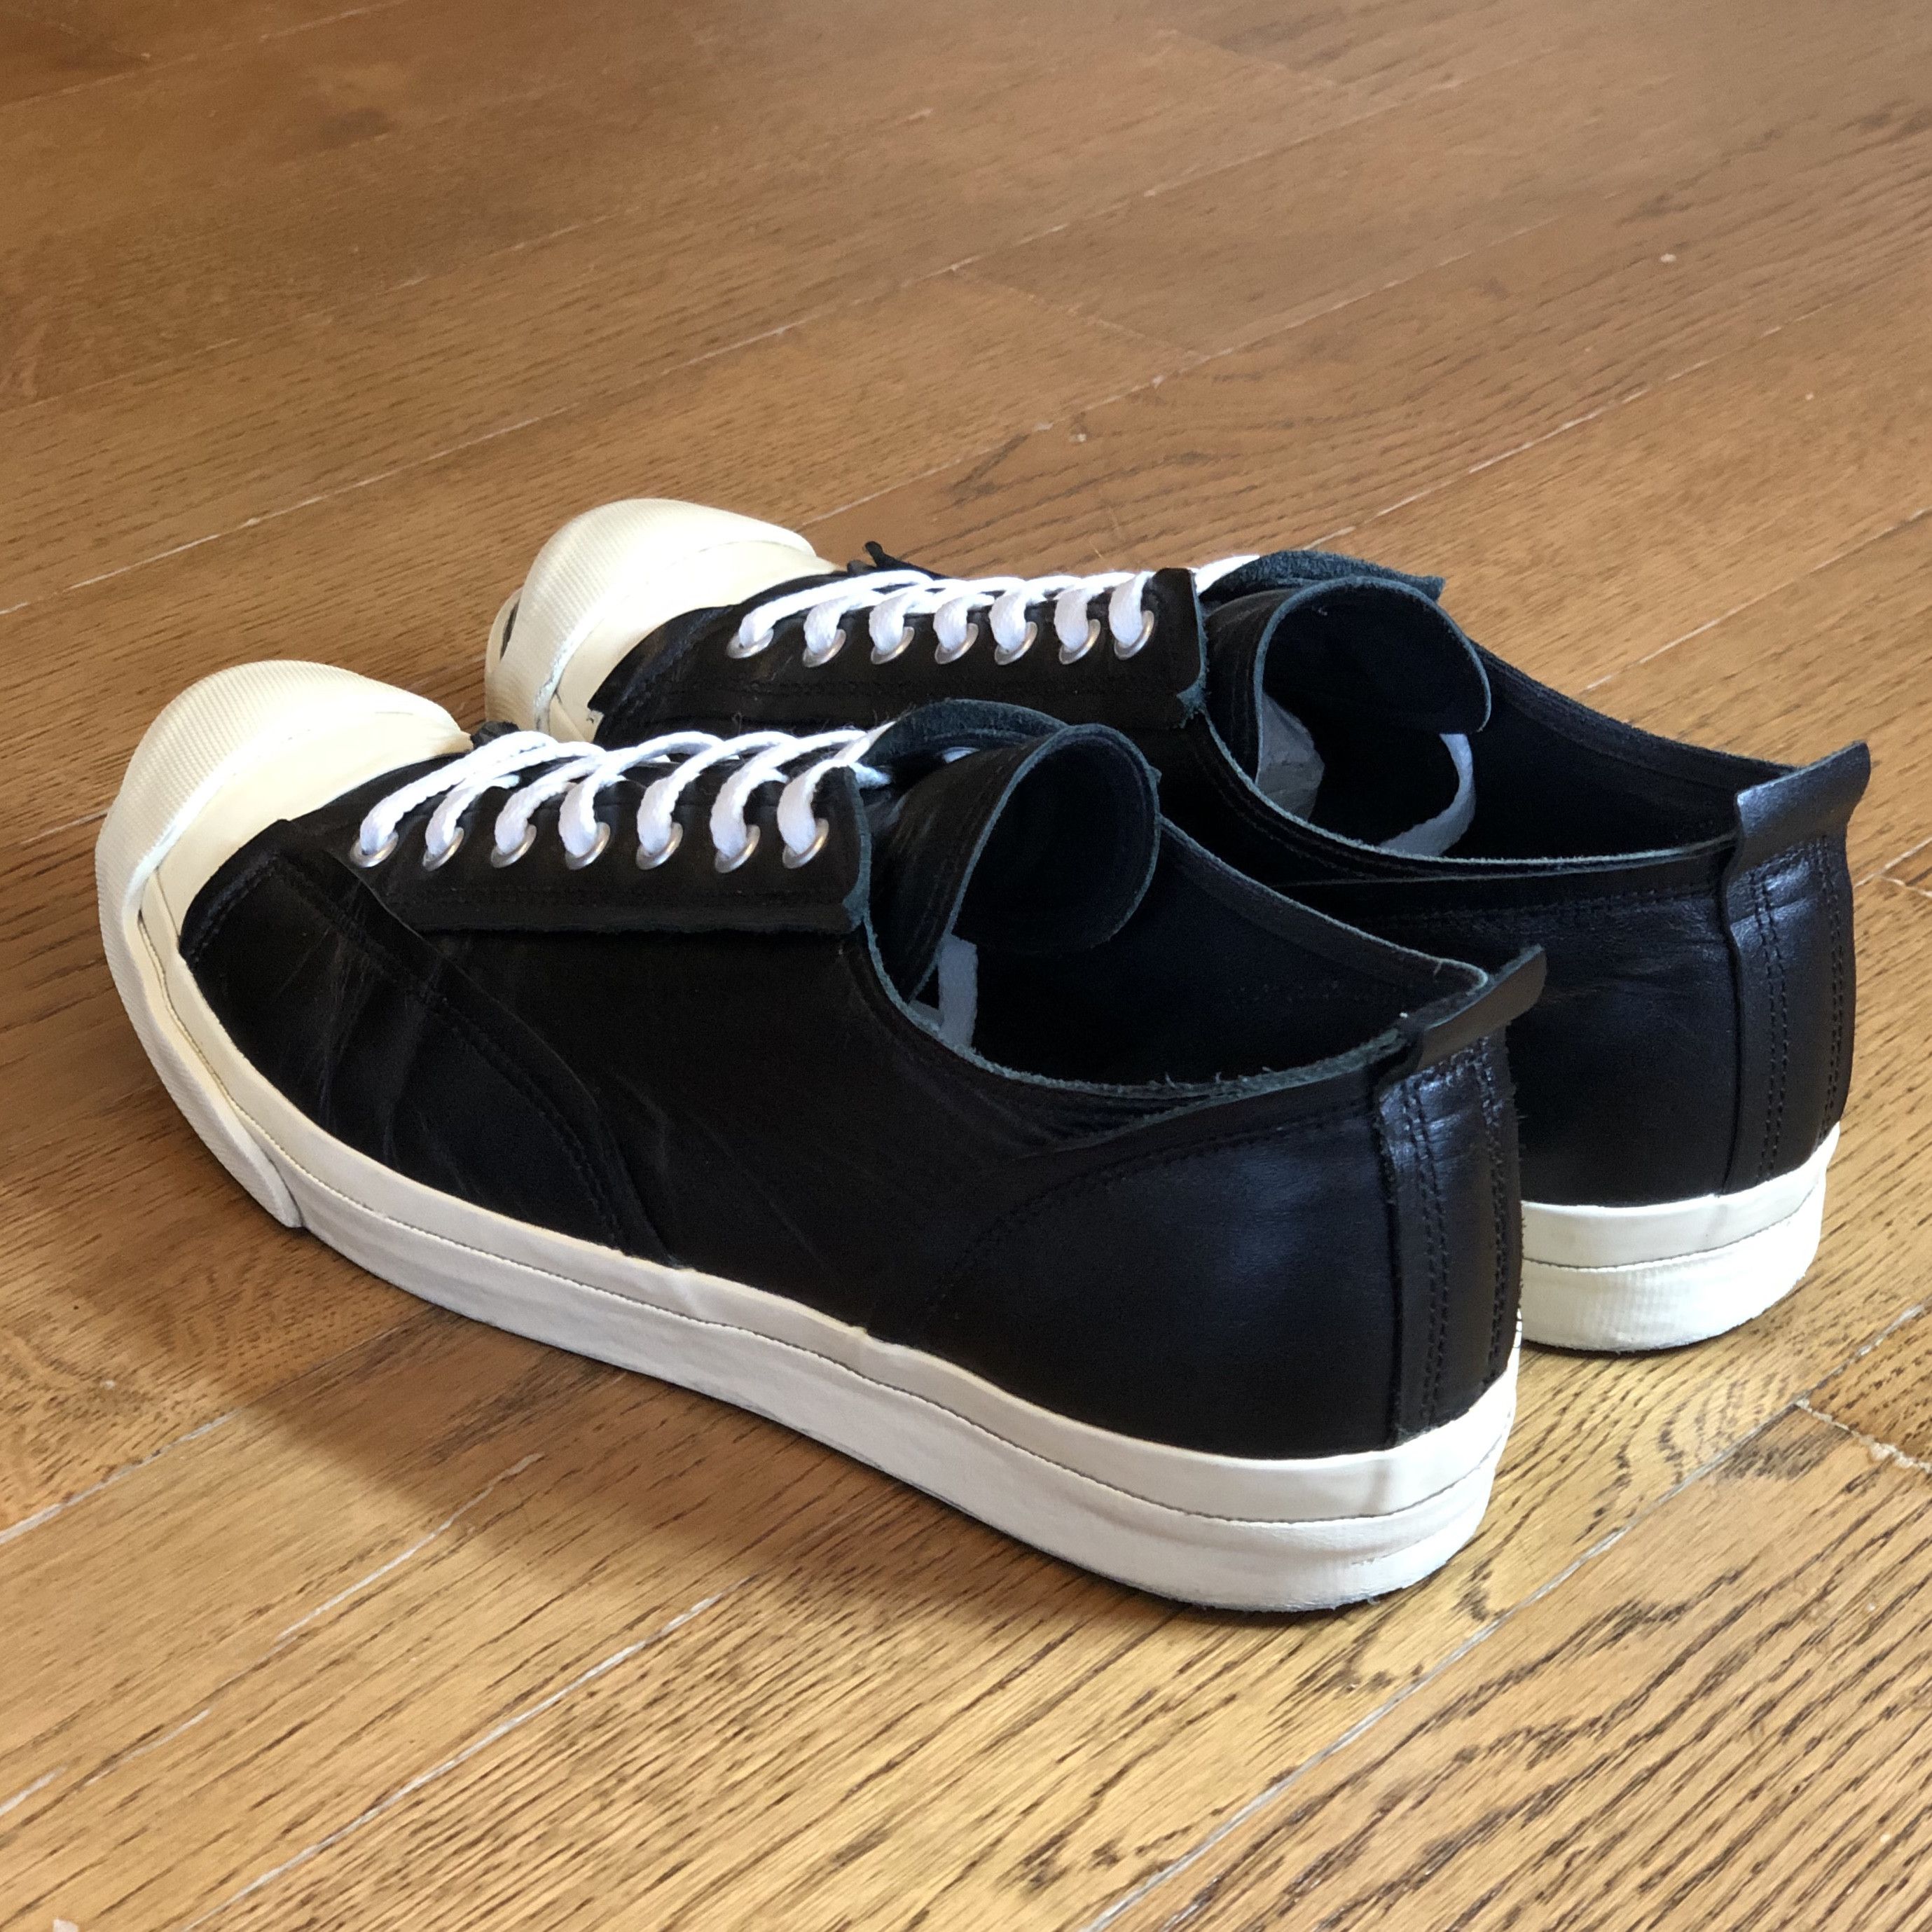 Undercover Undercover by Jun Takahashi Leather Jack Purcell Sneaker Size US 11 / EU 44 - 3 Thumbnail